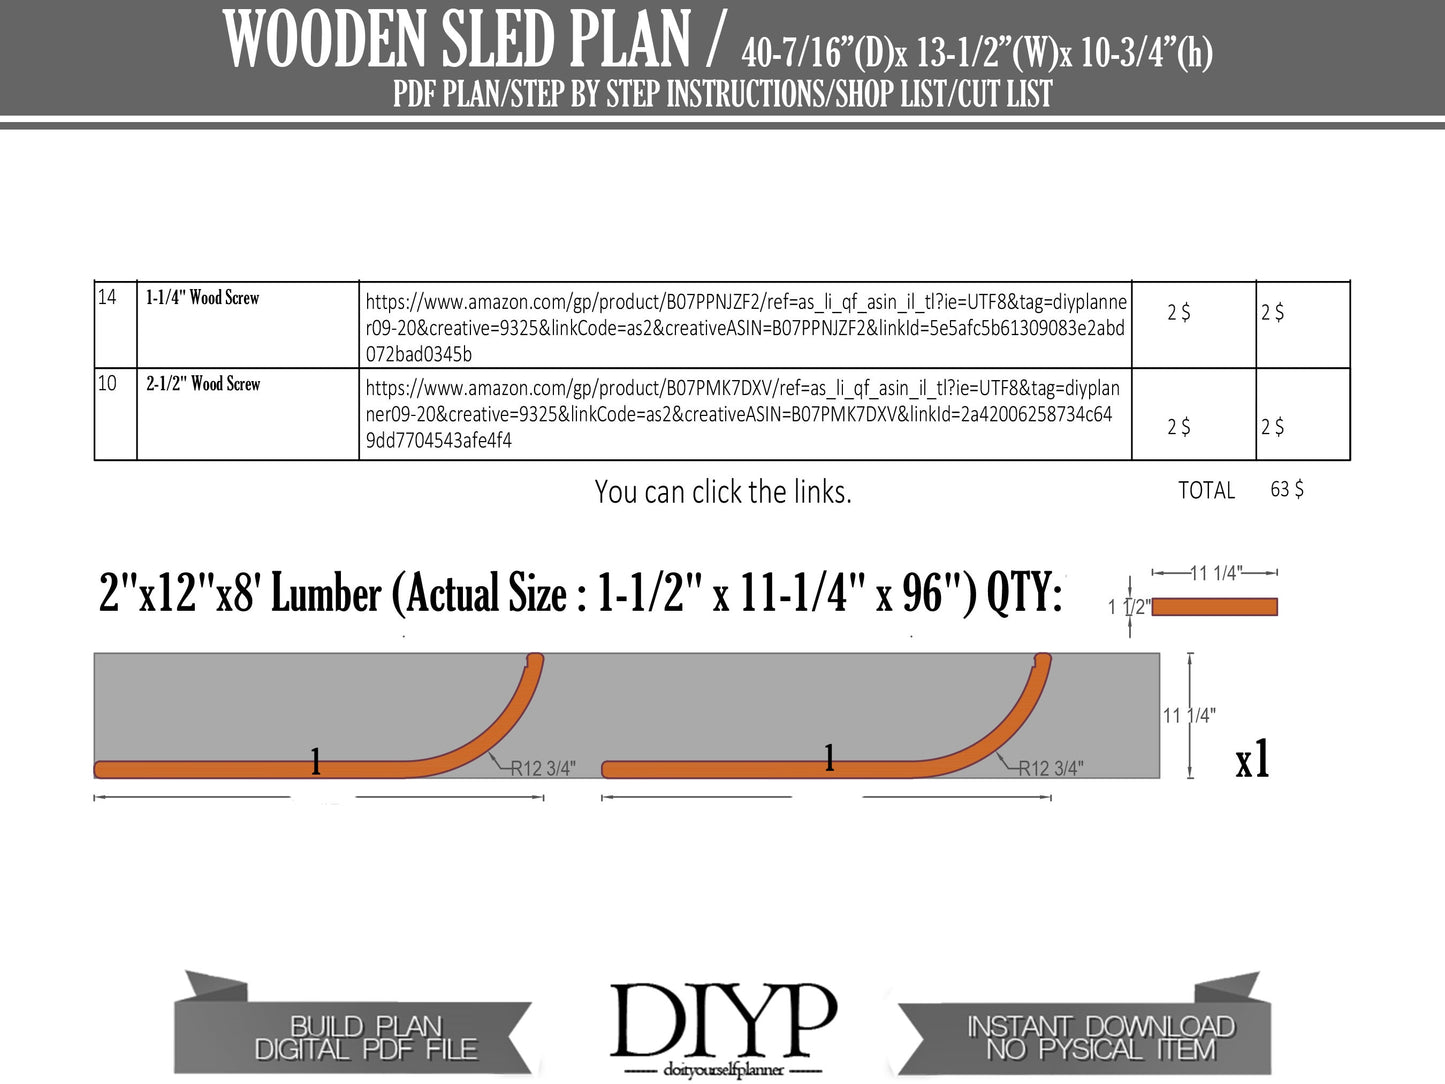 Build plans for DIY wooden sled plan, easy woodworking plans for sleigh